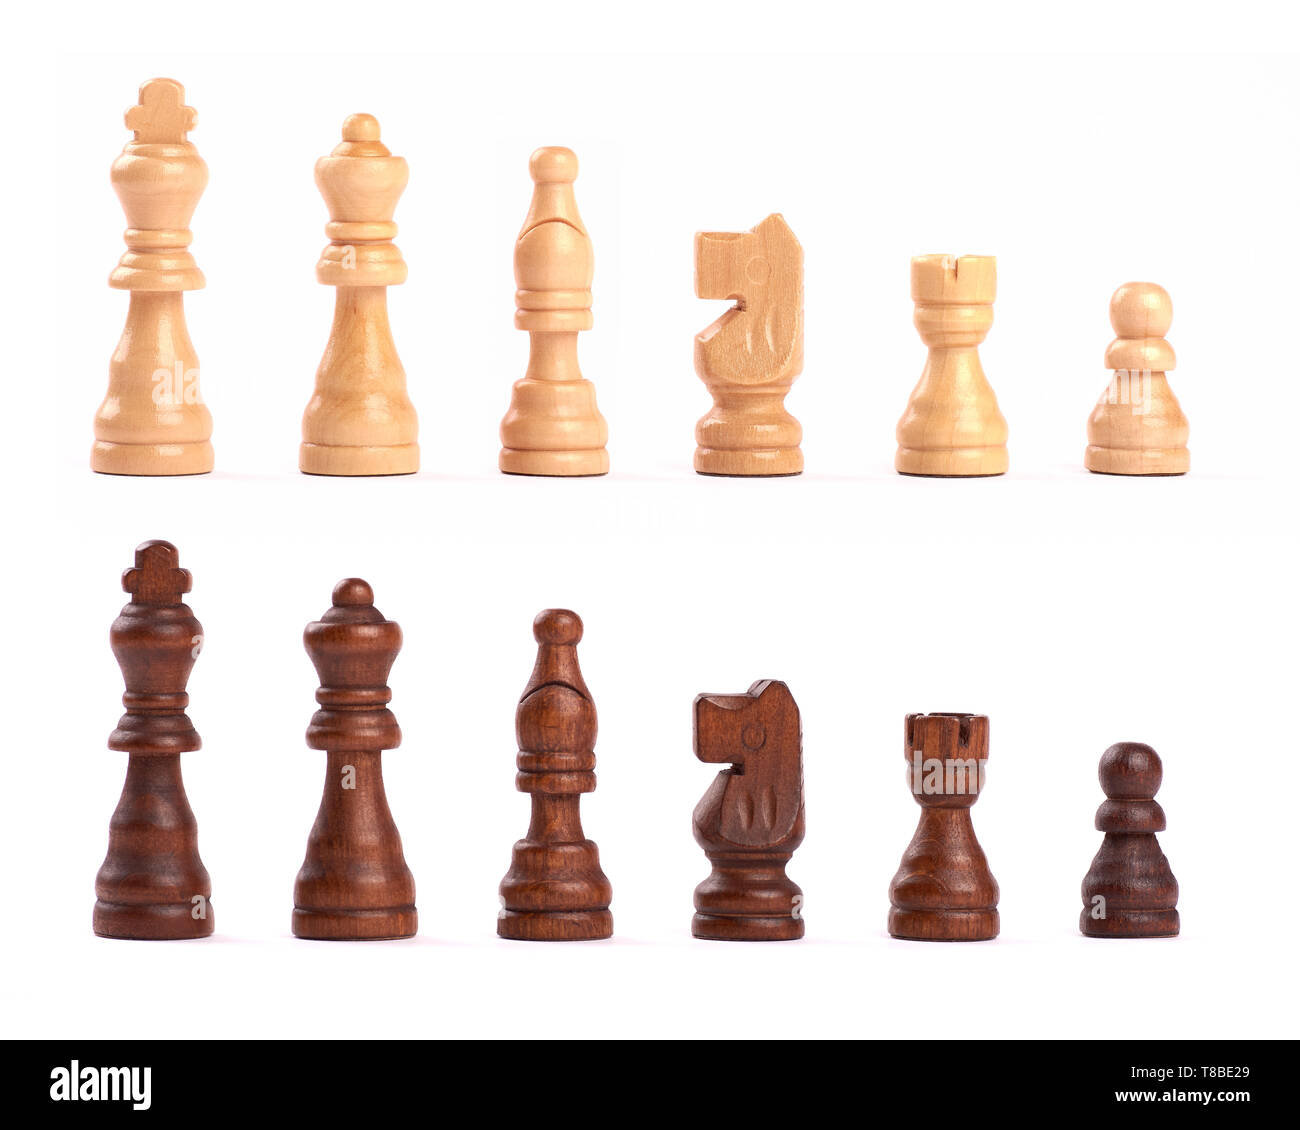 Set of black and white wooden chess figures standing in a row isolated on white background Stock Photo